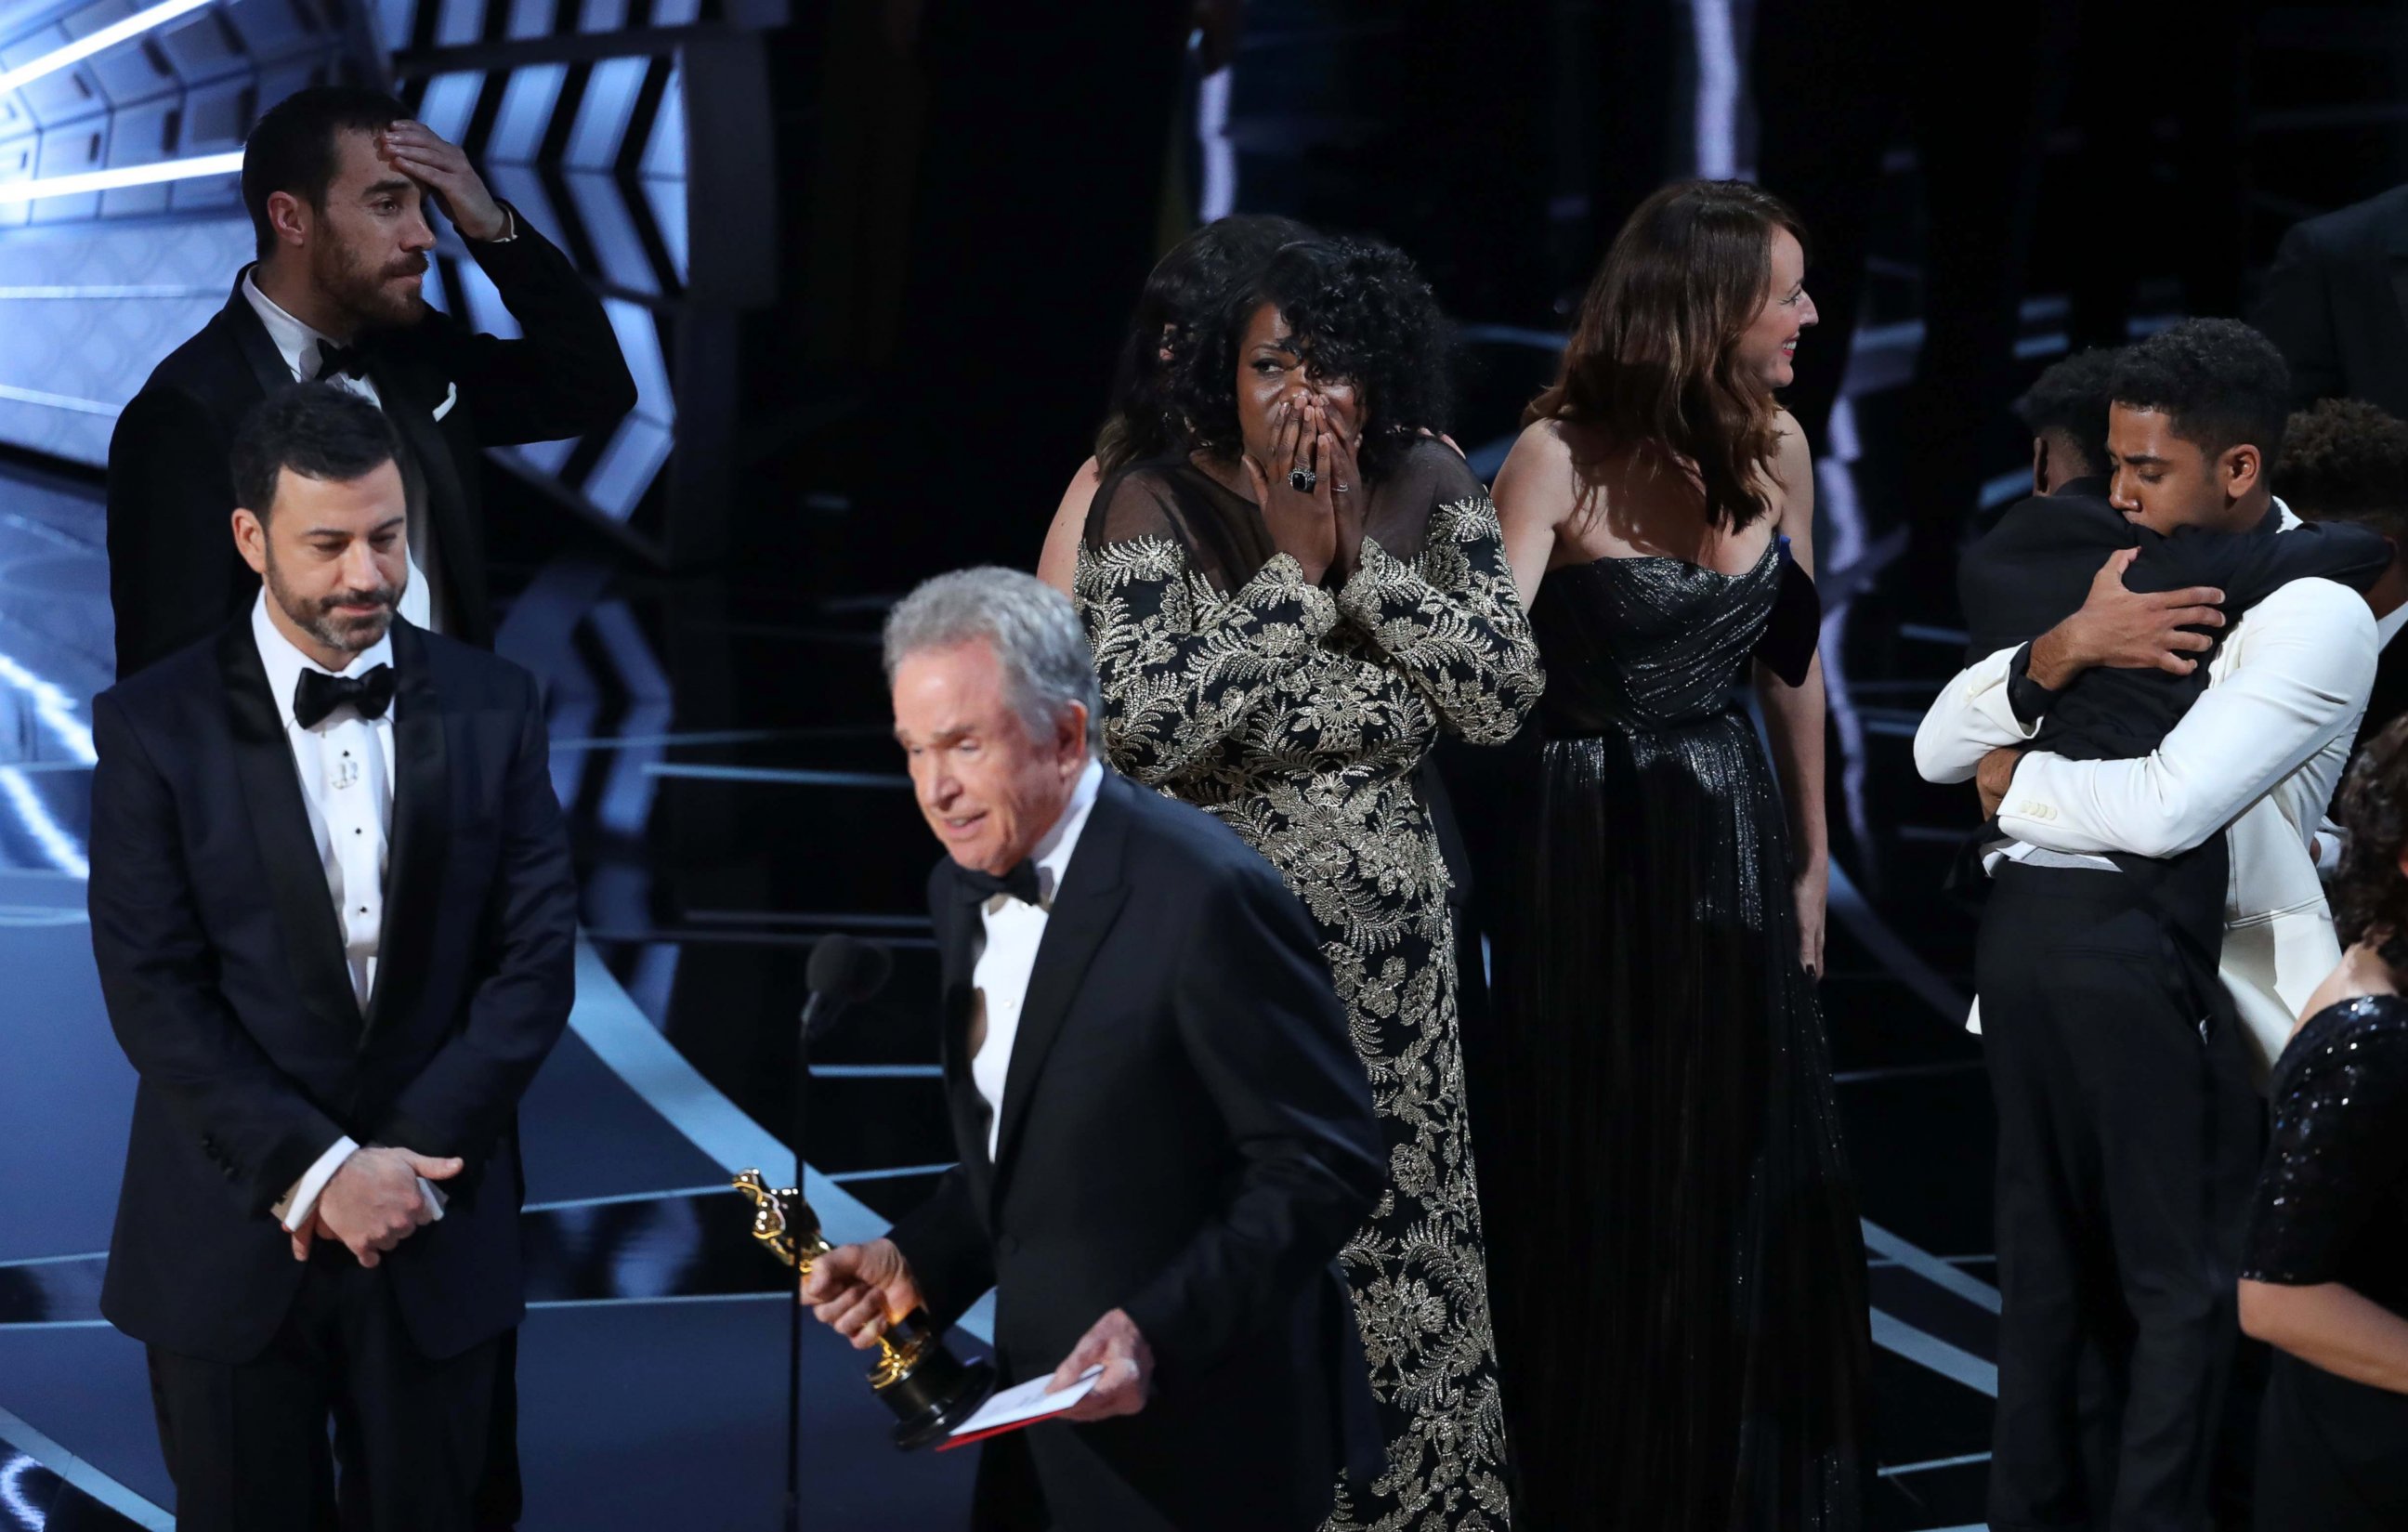 PHOTO: Members of the casts and crew from "Moonlight" react as presenter Warren Beatty announces that "Moonlight" won the Best Picture award at the 89th Academy Awards, Feb. 26, 2017.